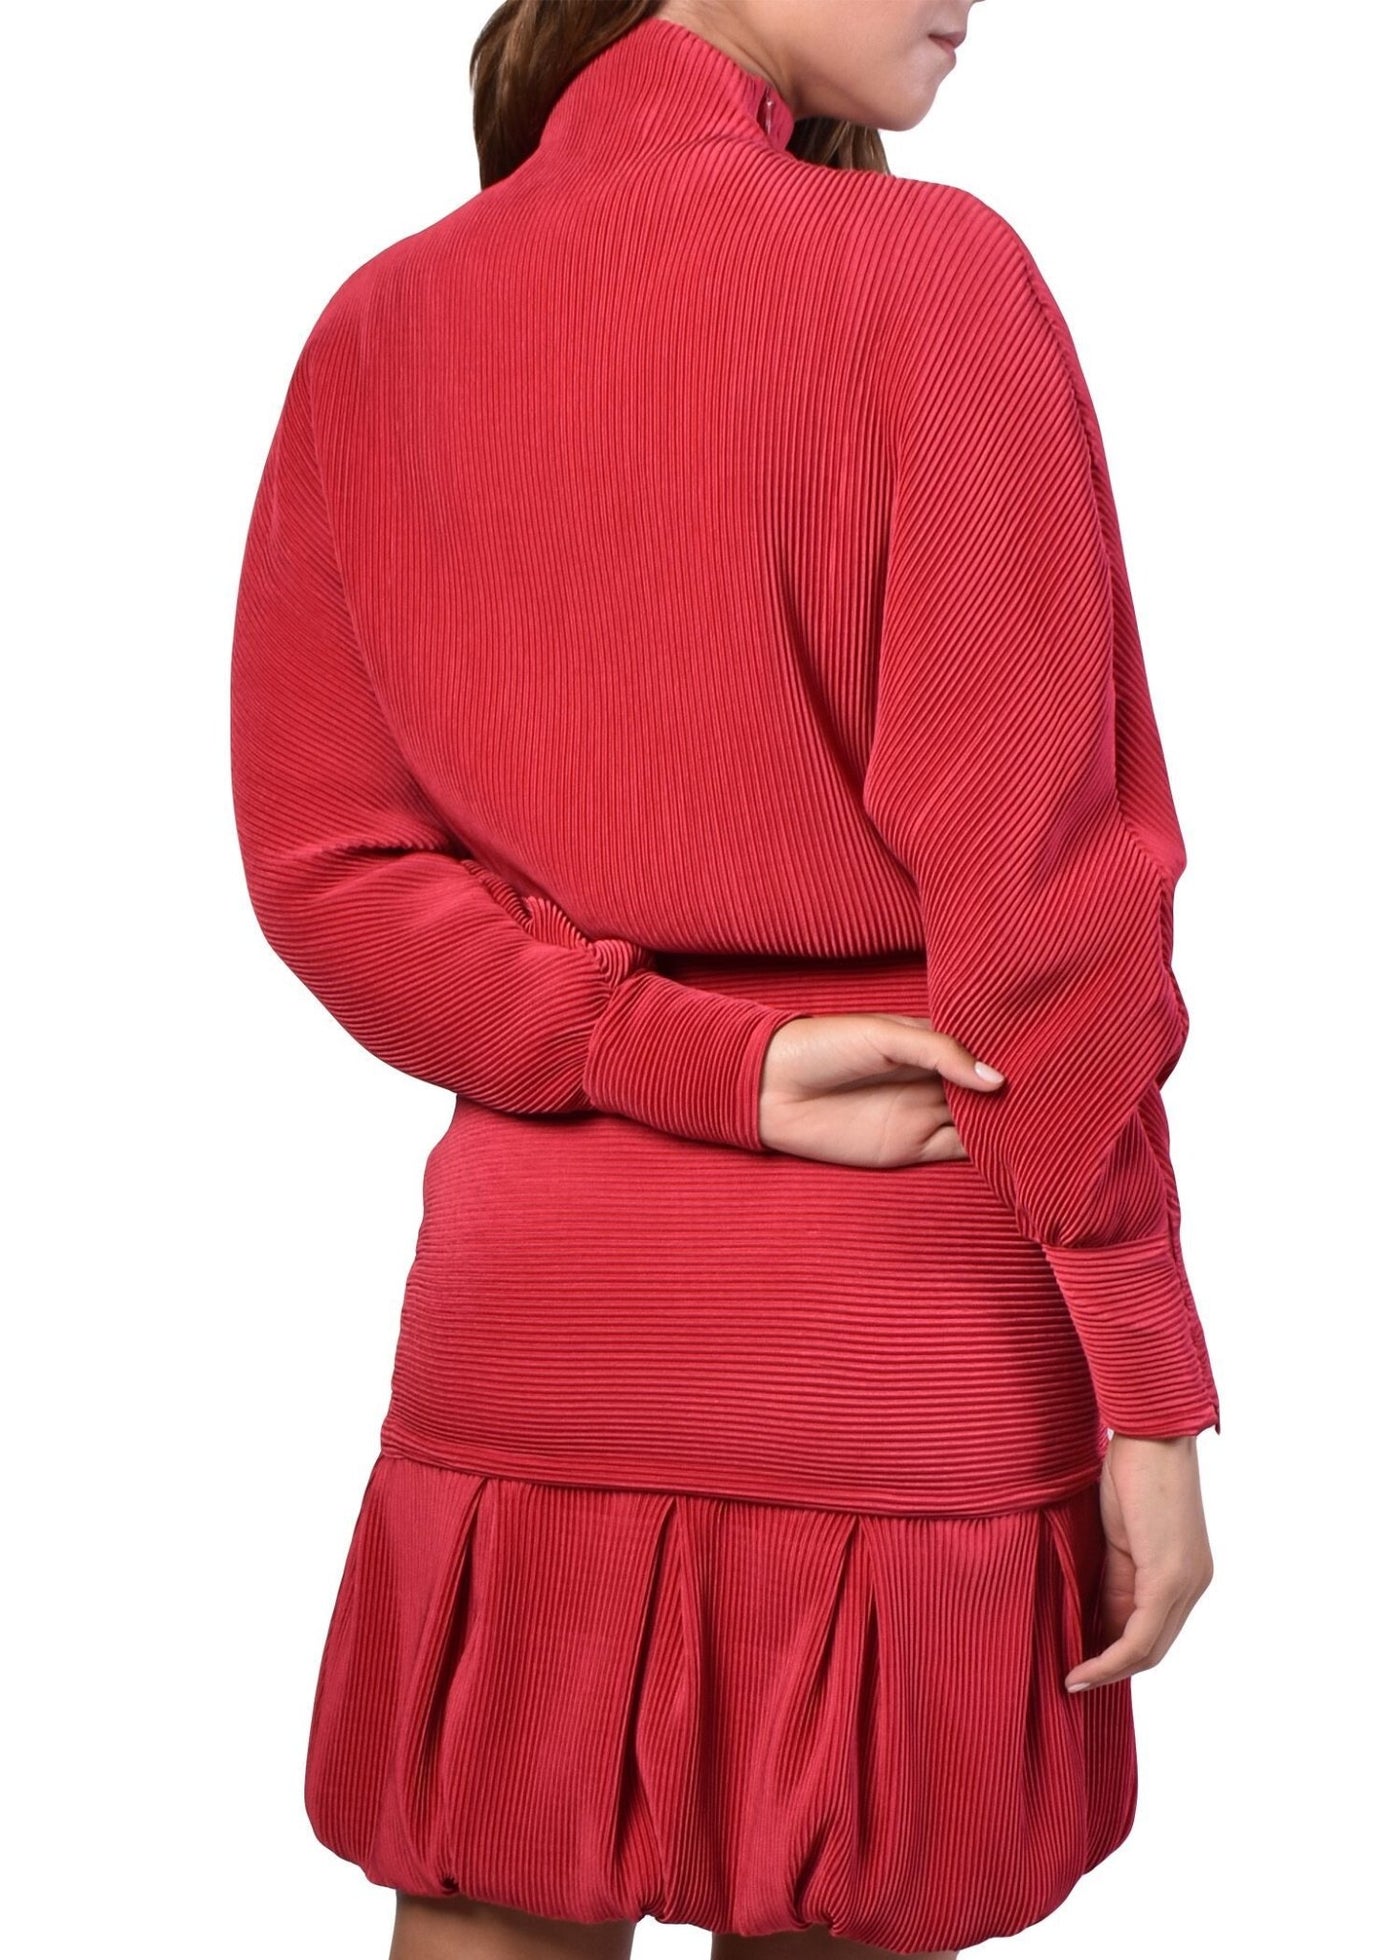 Pleated Sweater - The Clothing LoungeNOPIN